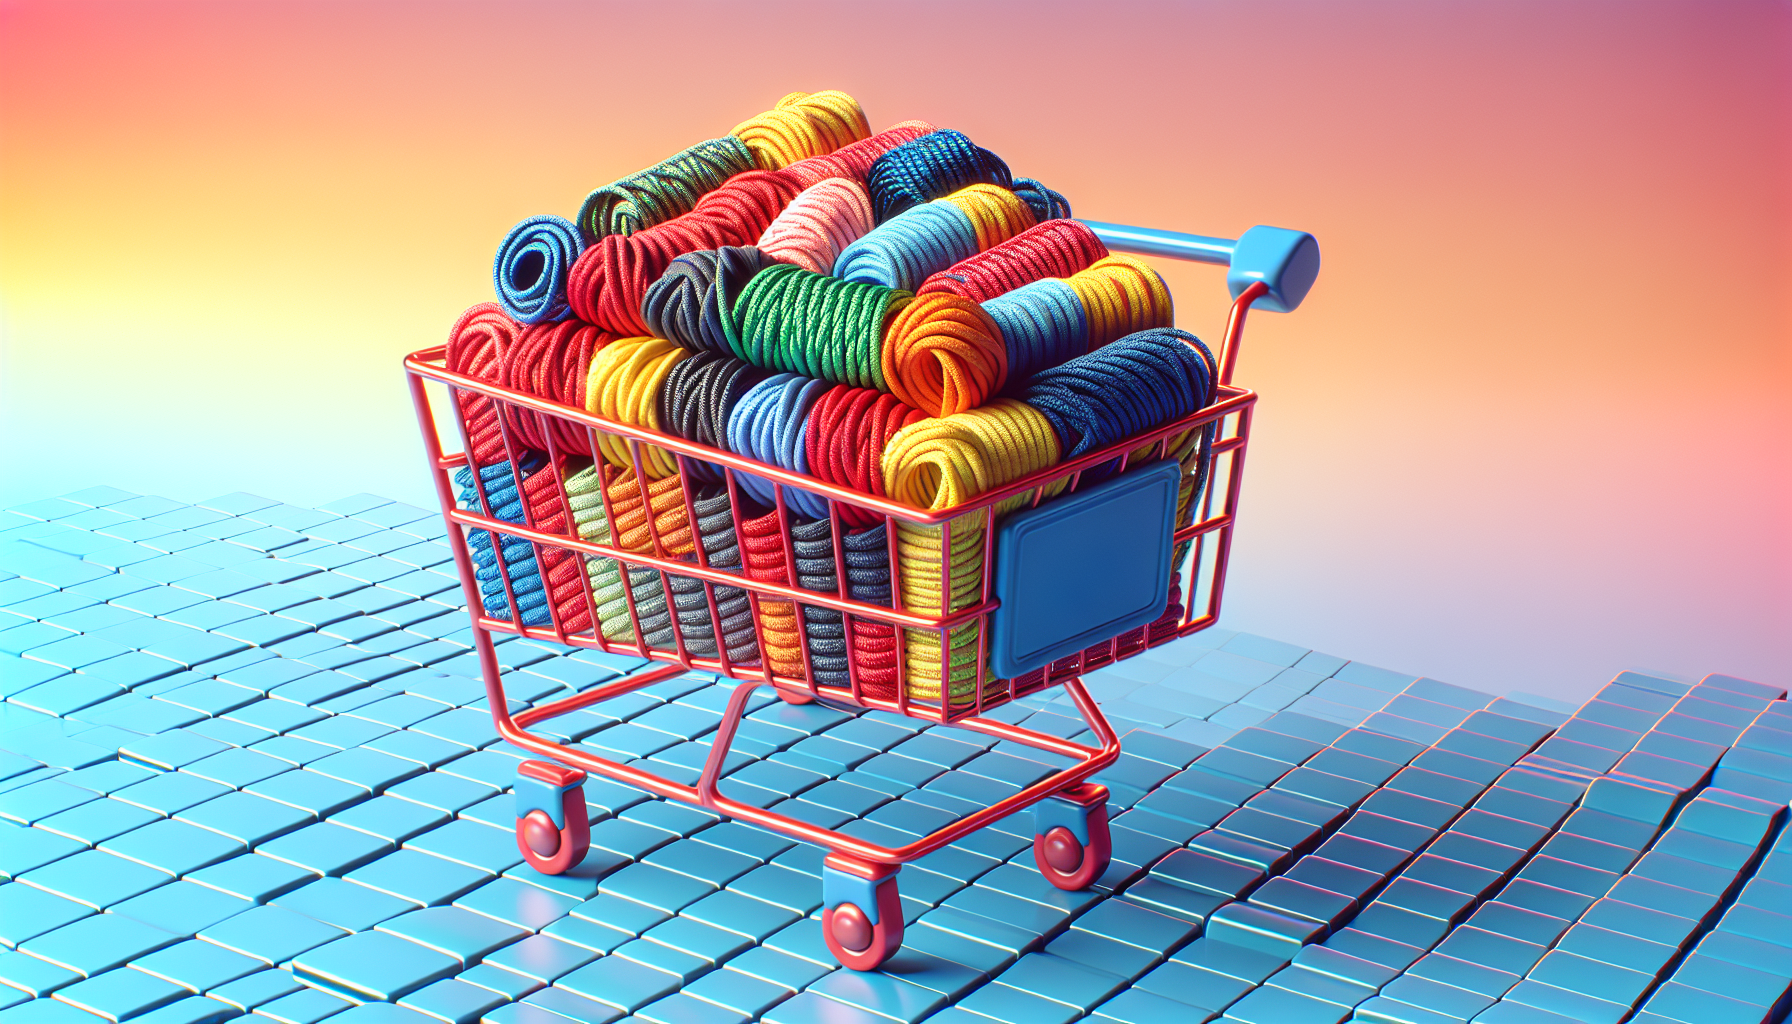 Online shopping cart with rope laces